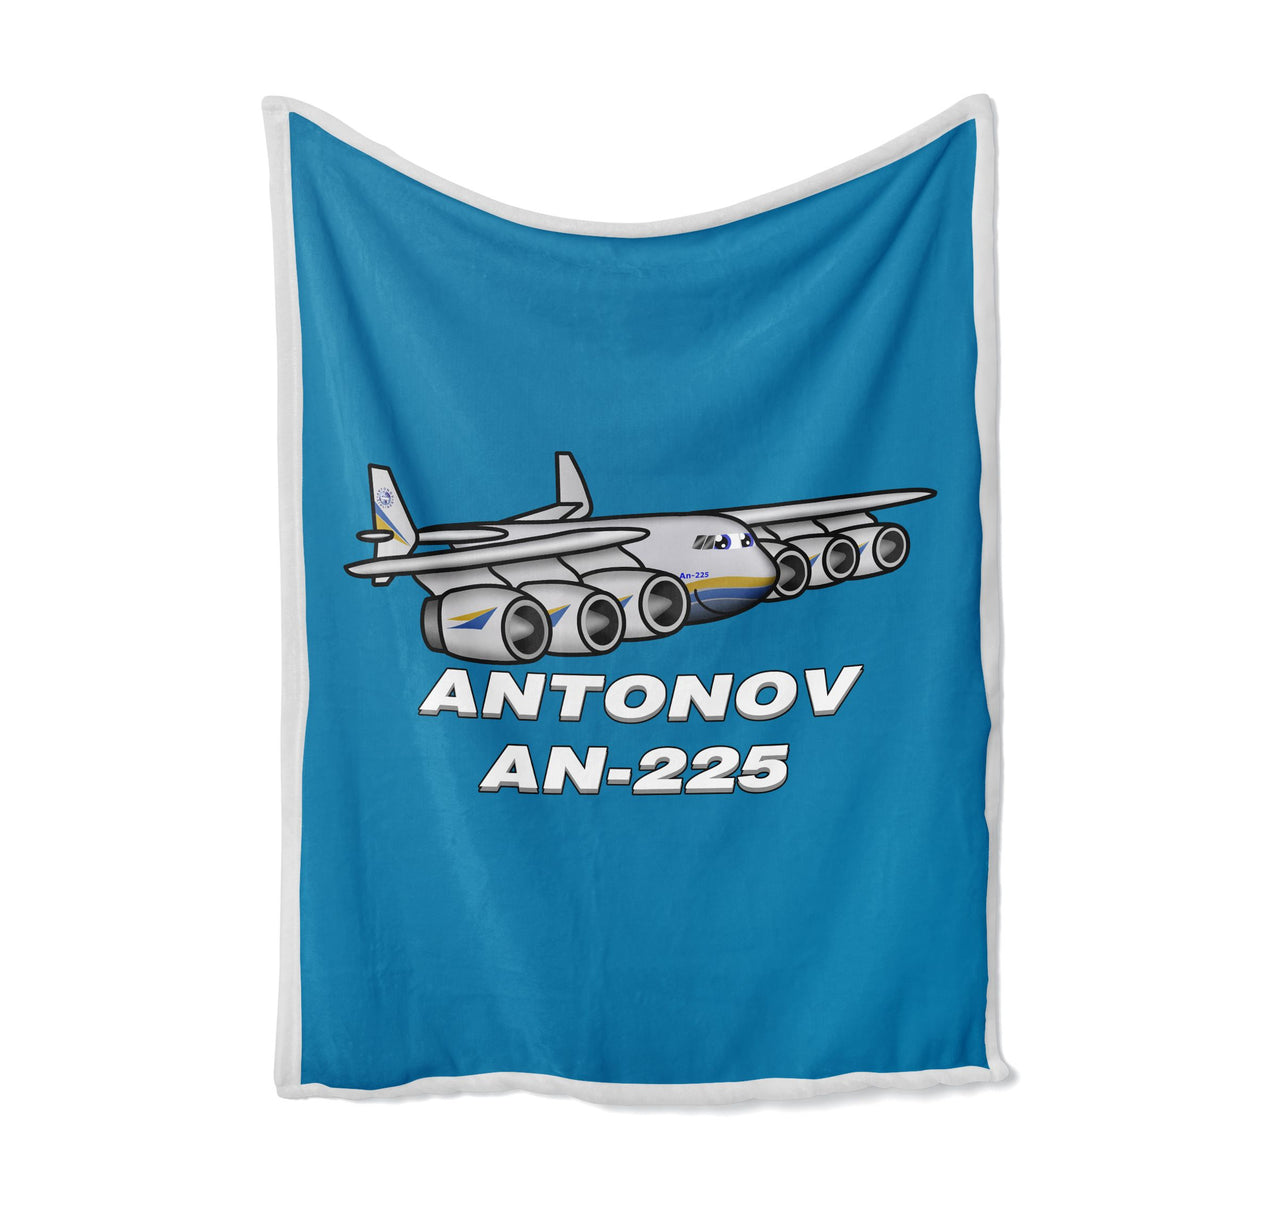 Antonov AN-225 (25) Designed Bed Blankets & Covers